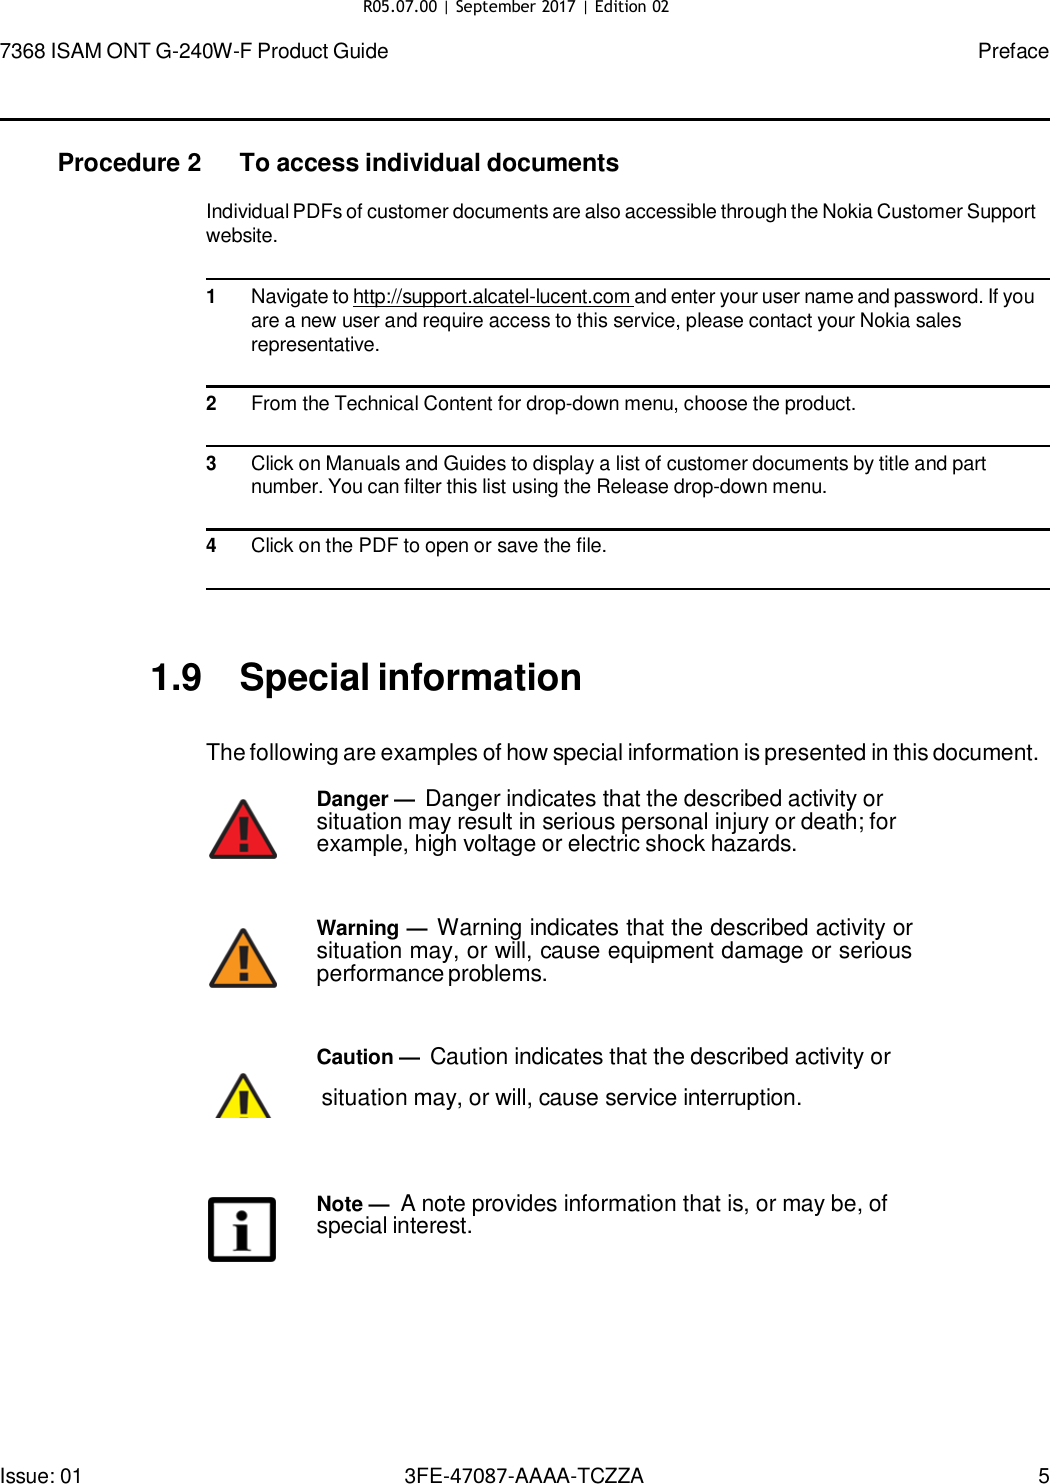 Page 5 of Nokia Bell G240WFV2 7368 ISAM GPON ONU User Manual 7368 ISAM ONT G 240W F Product Guide